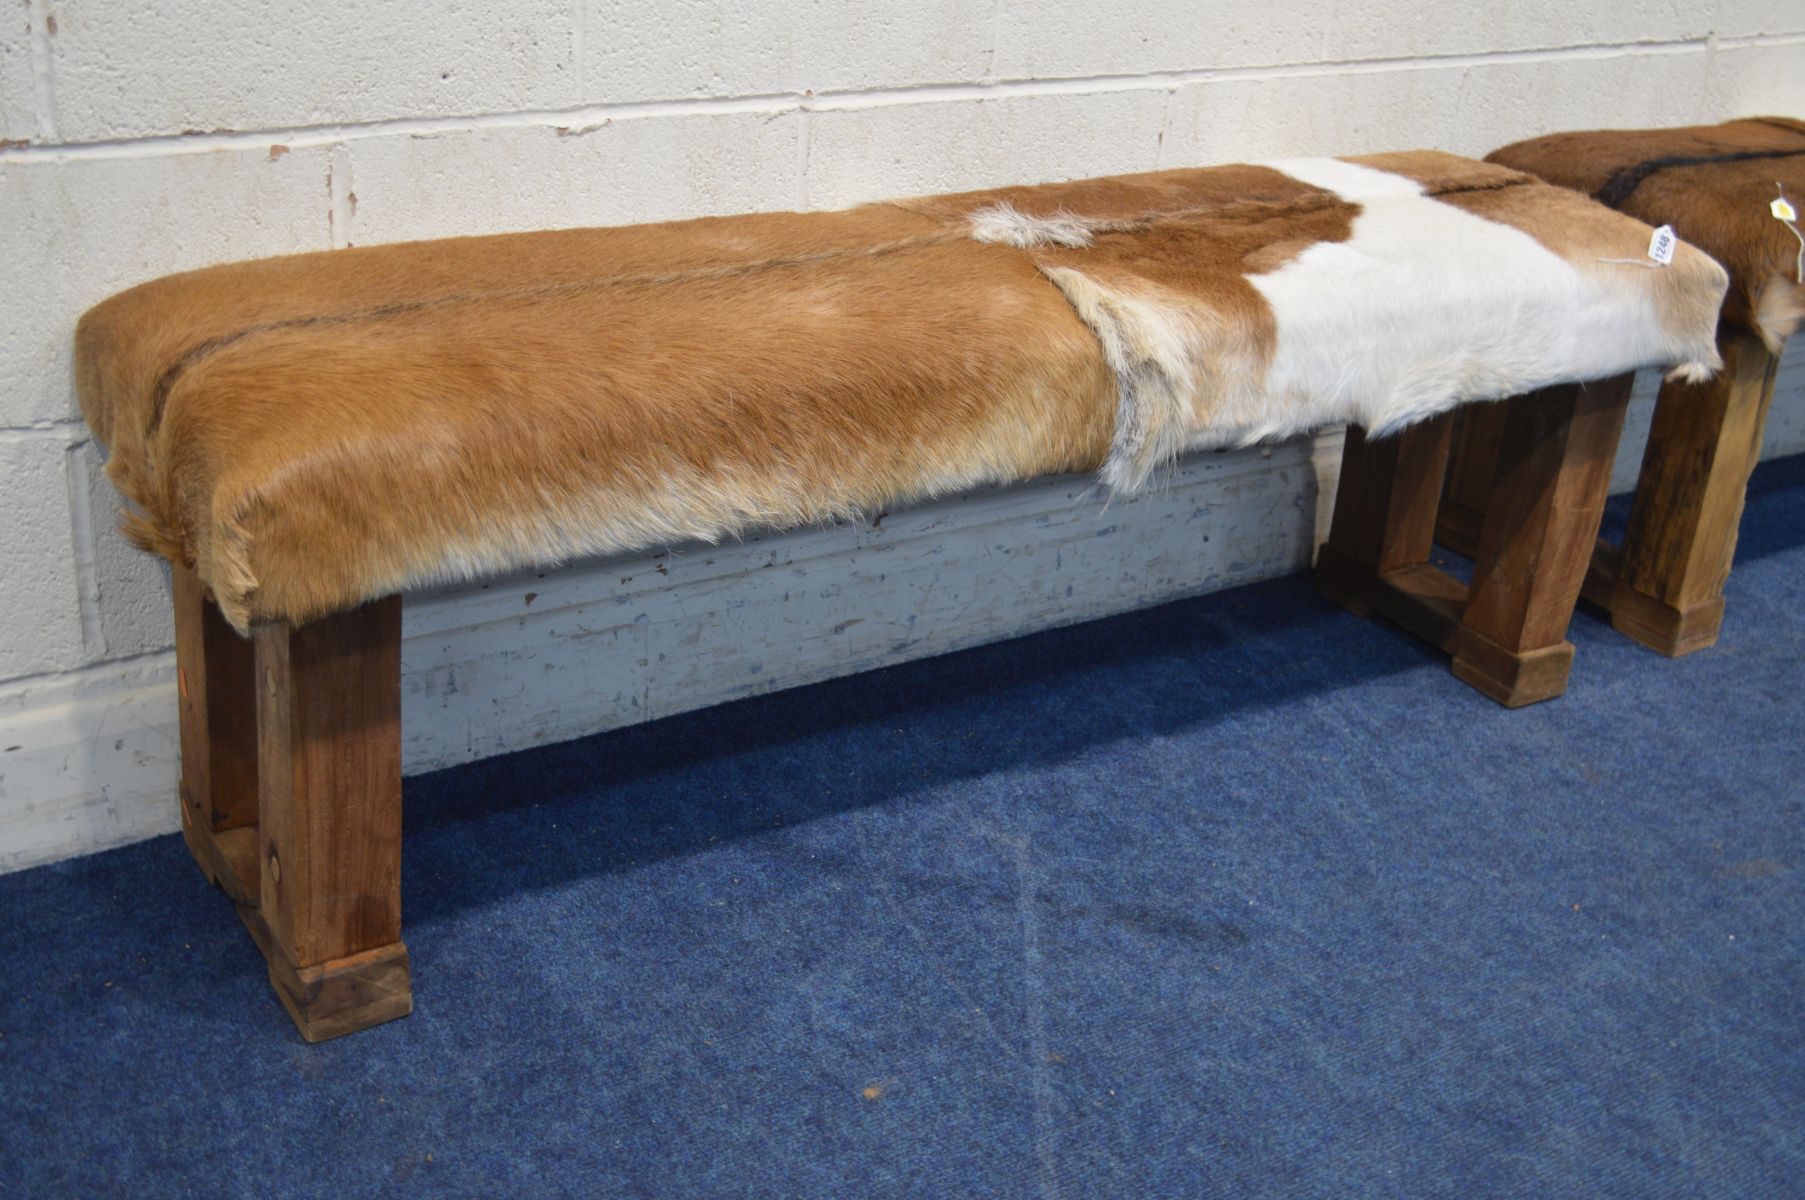 A PAIR OF RUSTIC RECTANGULAR STOOLS with animal hide seat covers, width 152cm x depth 44cm x - Image 2 of 3